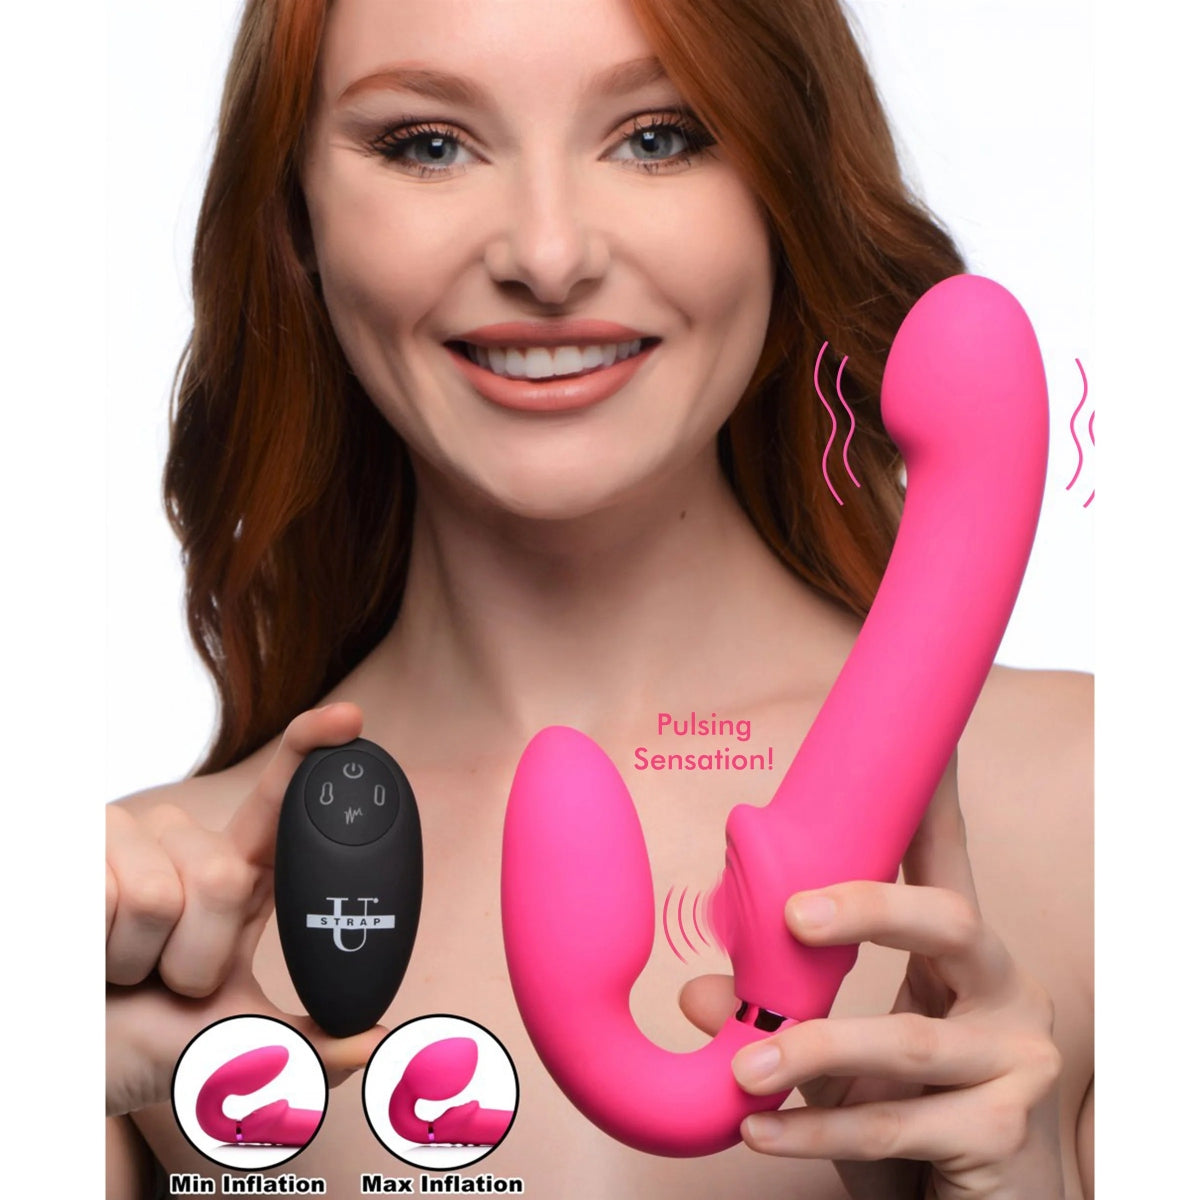 Strap U 10X Ergo Fit G-Pulse Inflatable & Vibrating Strapless Strap-On Pink